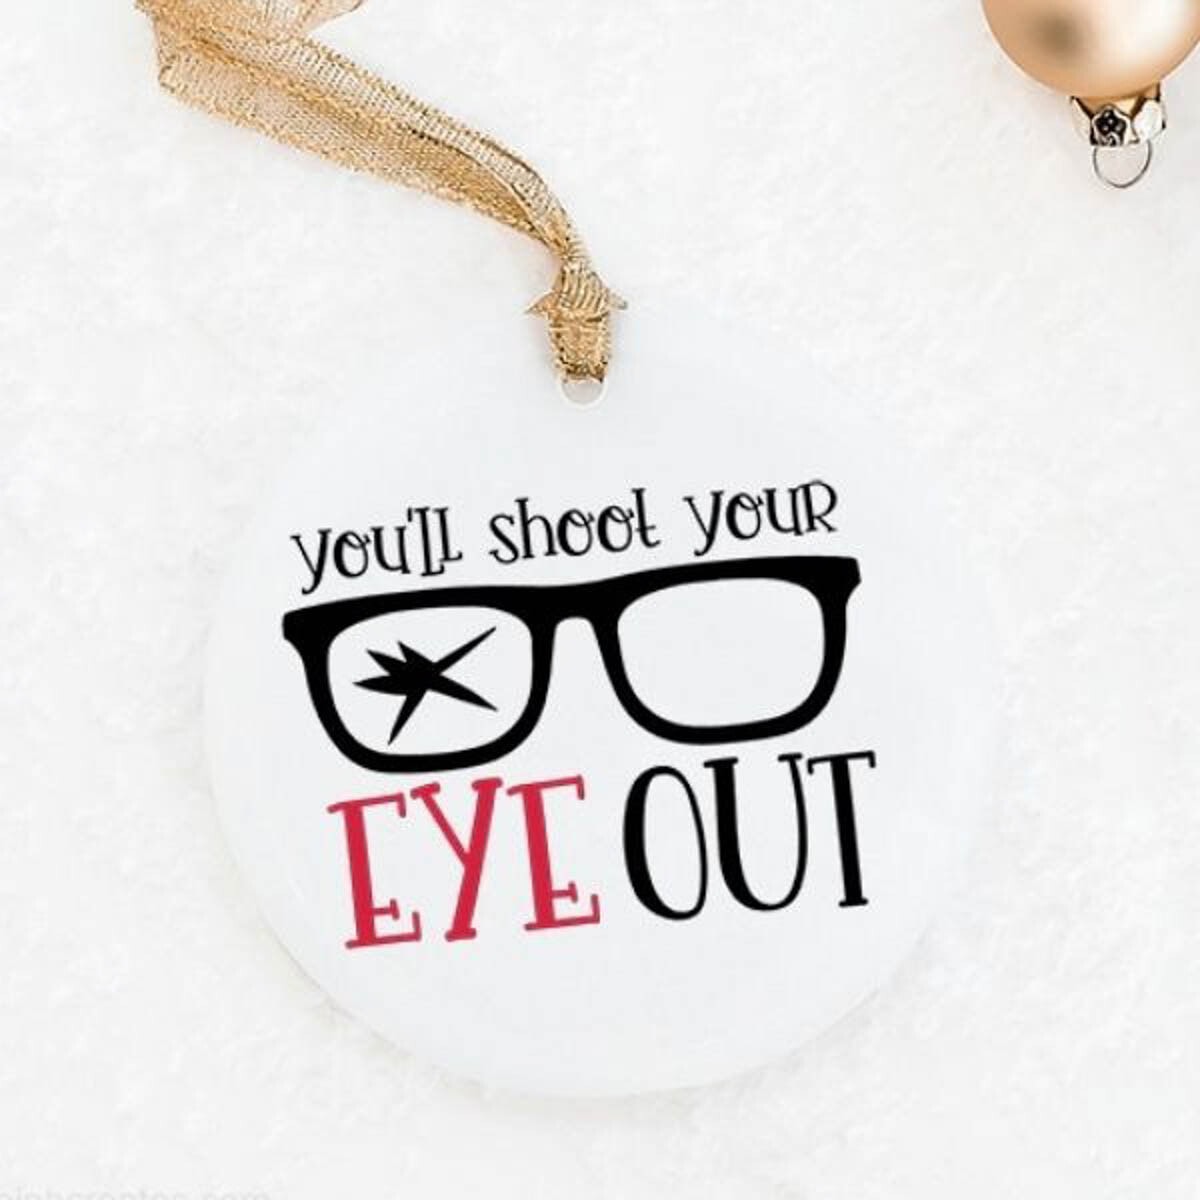 "You'll shoot your eye out" ornament made with Cricut